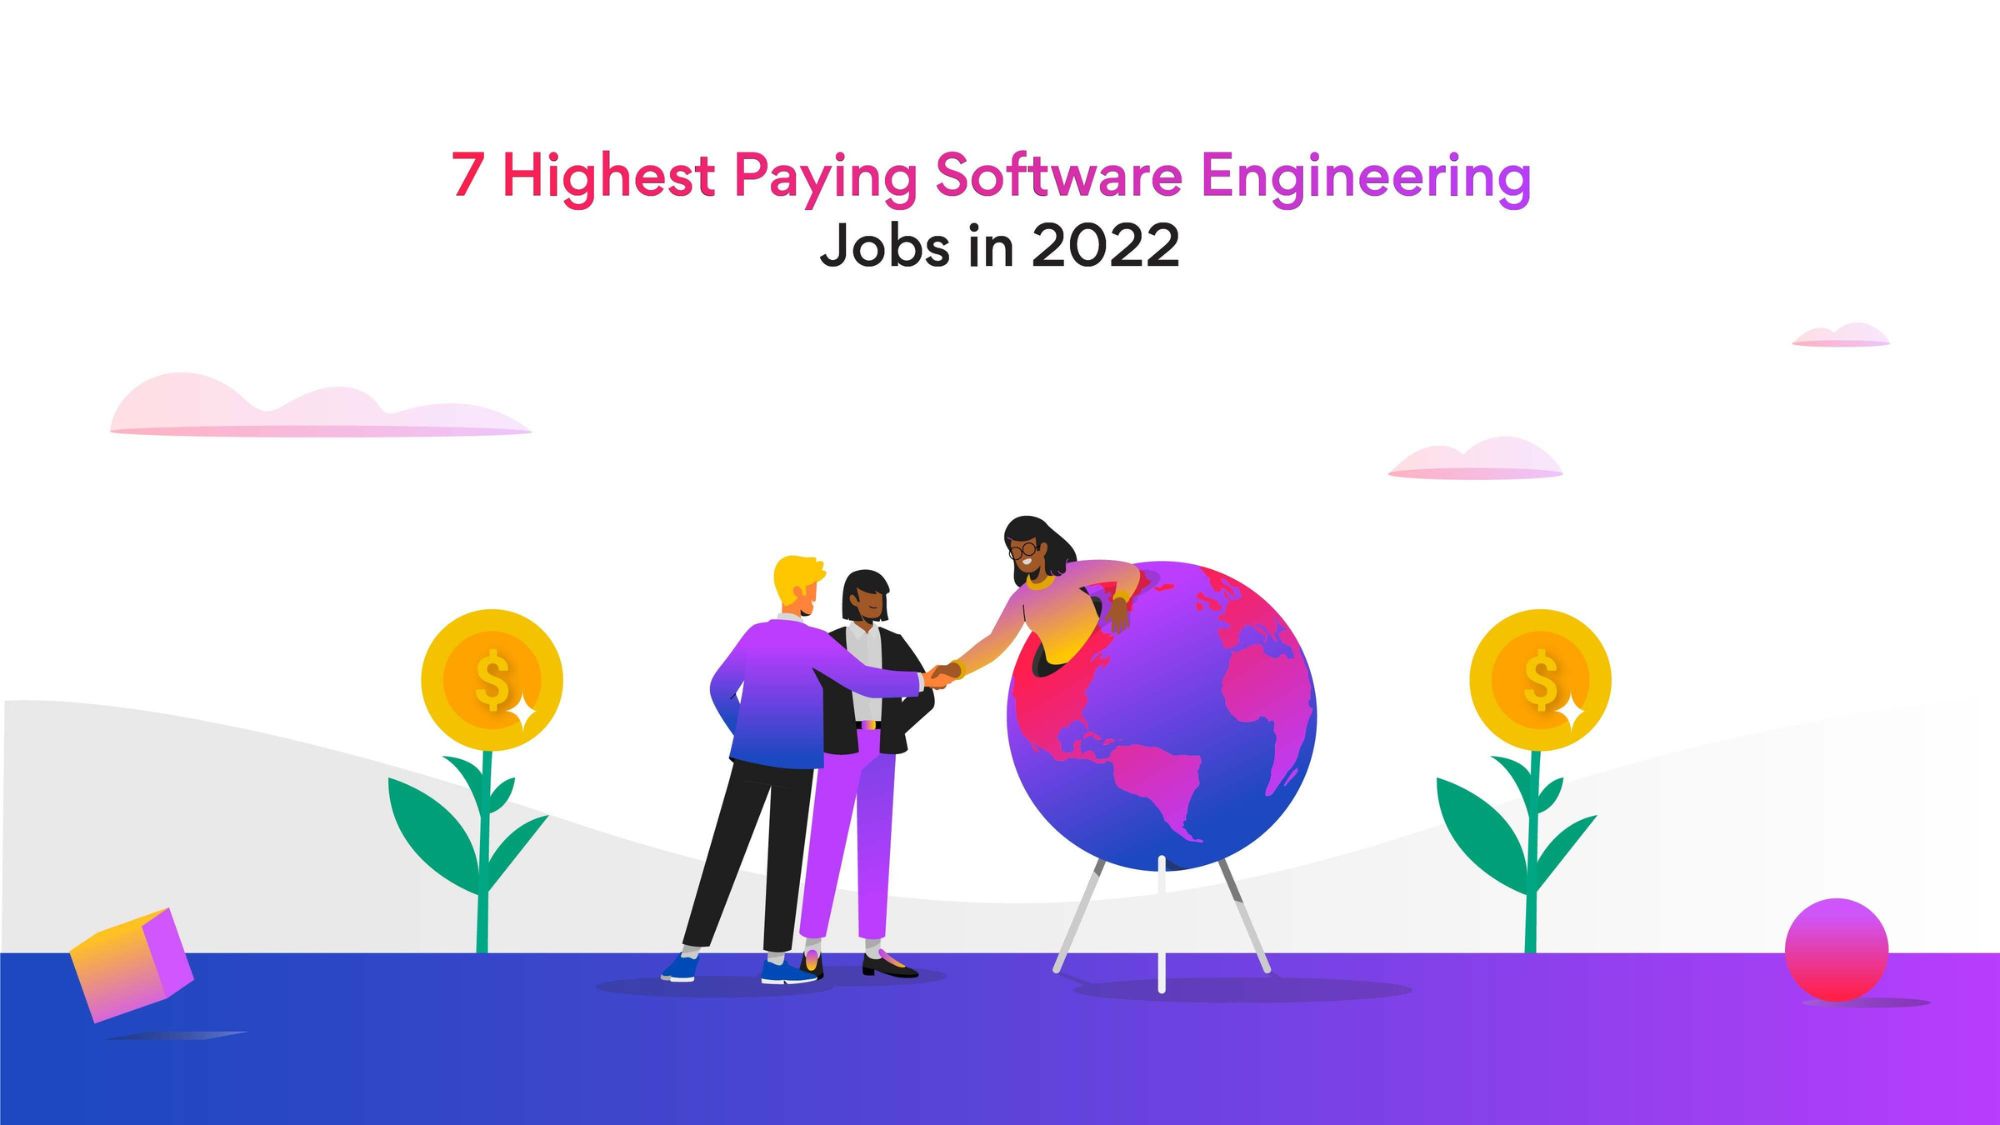 Highest paying software engineering jobs in 2022